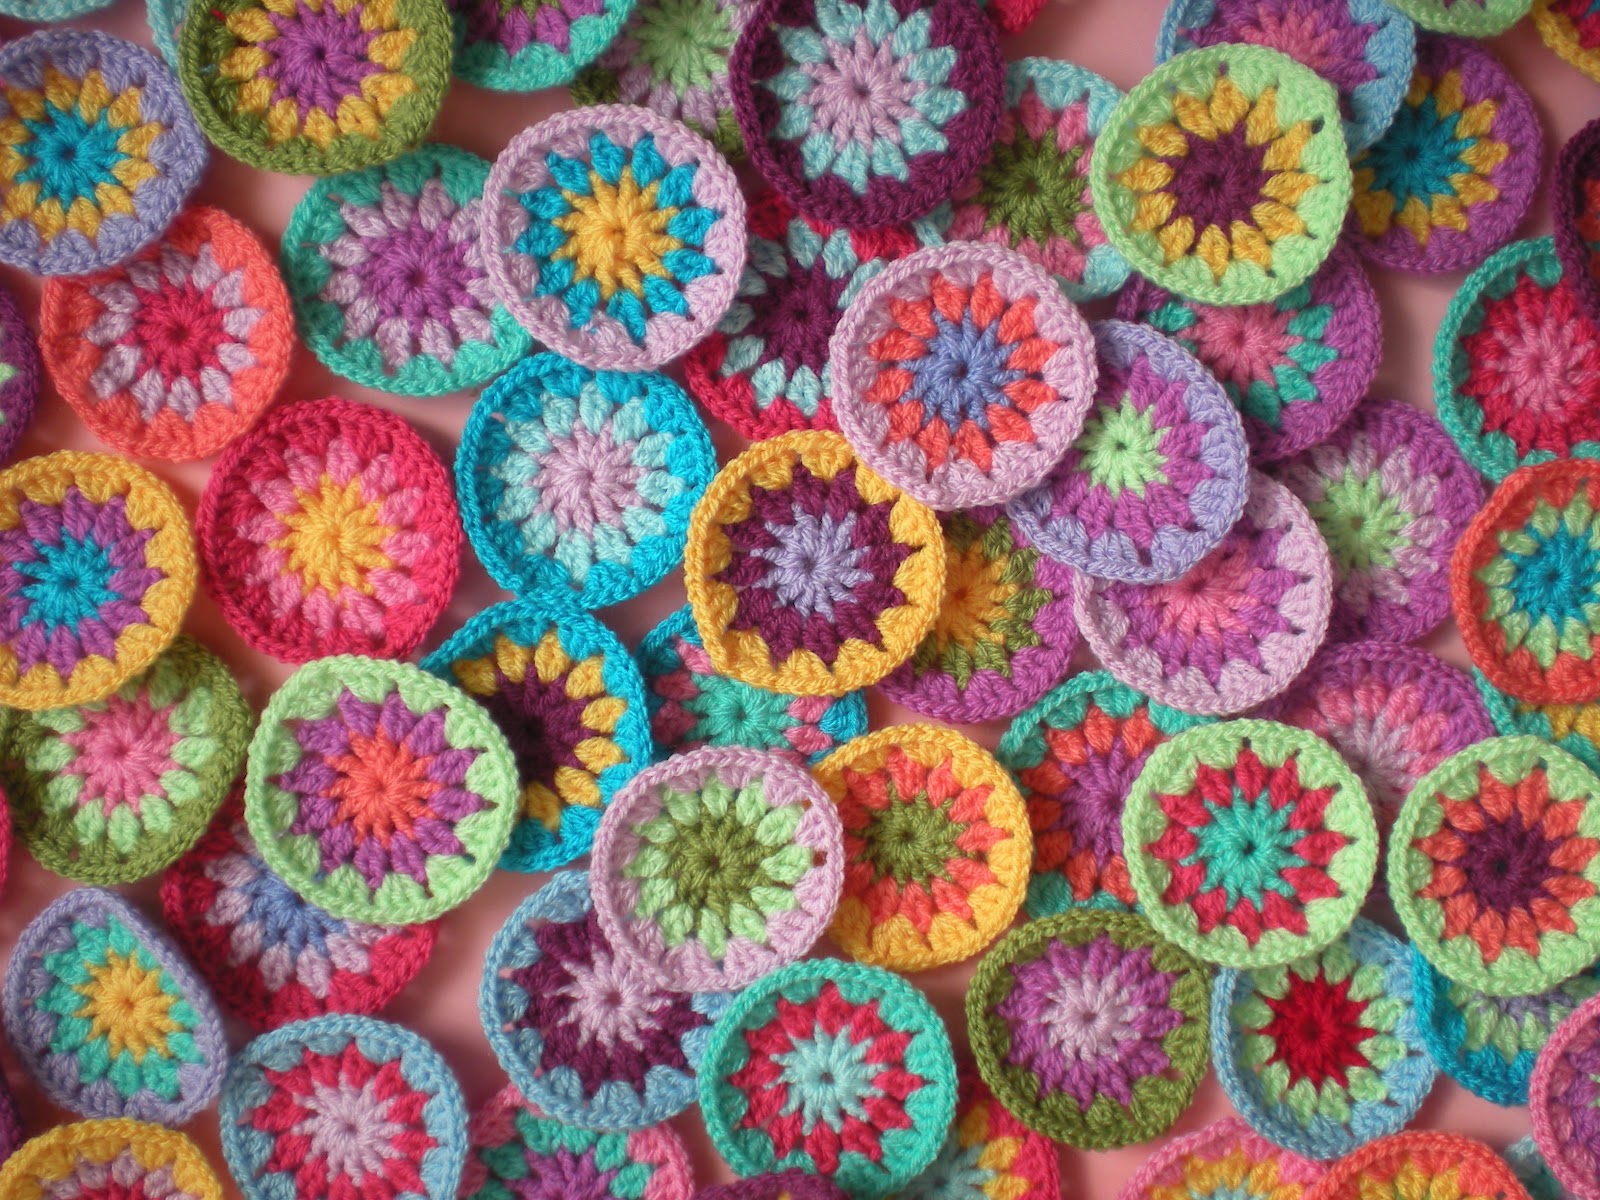 A photo of several dozen colorful crocheted circles scattered on a table